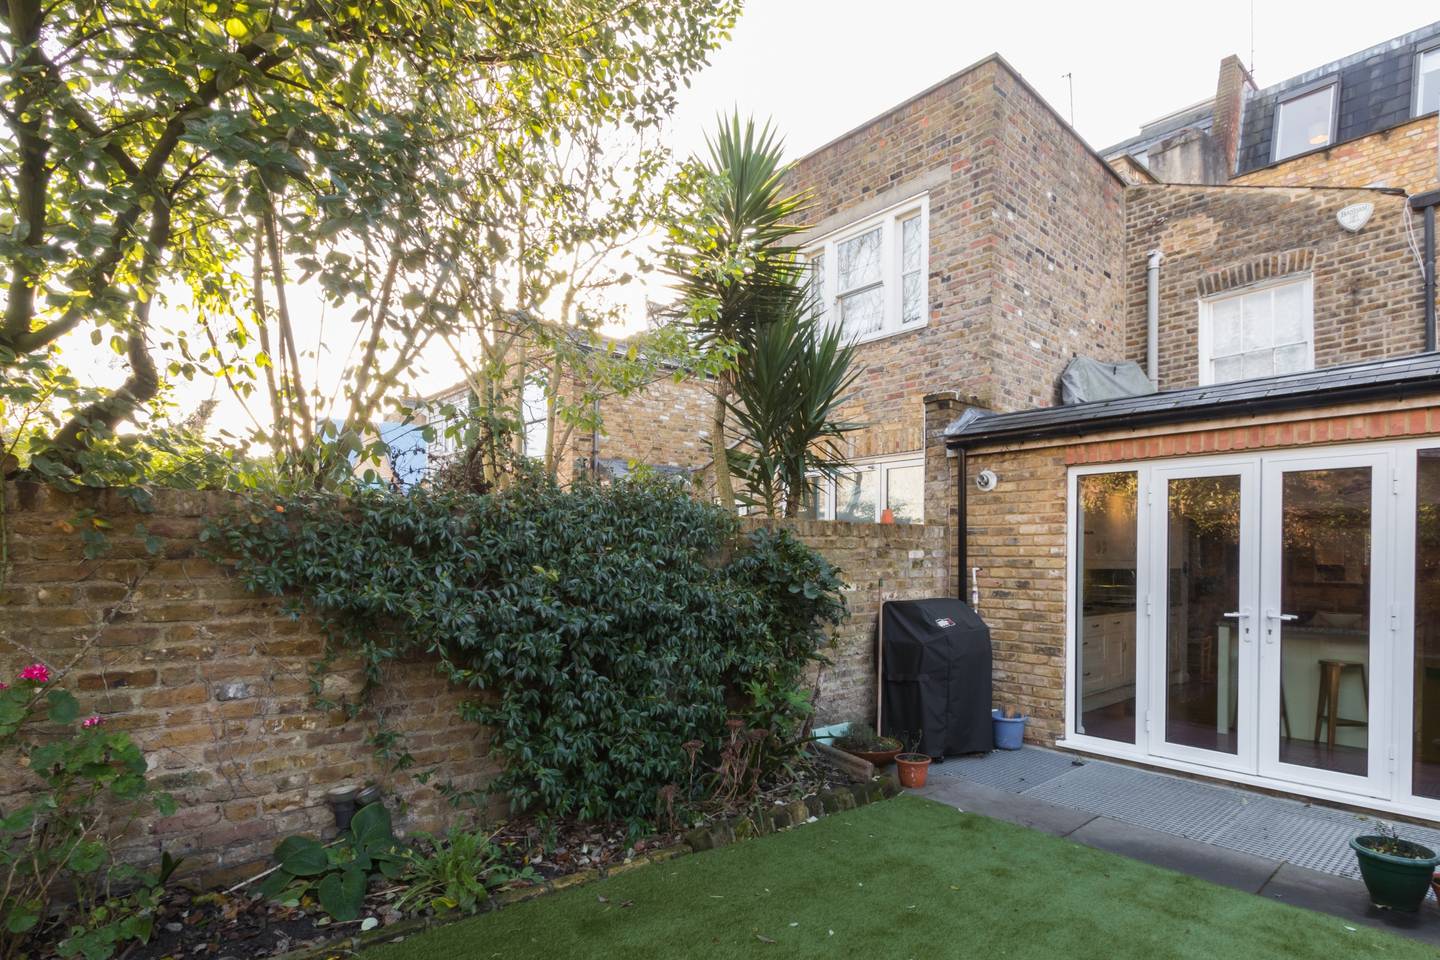 Property Image 2 - Rare, Spacious Home with Splendid Garden; in the Heart of Fulham